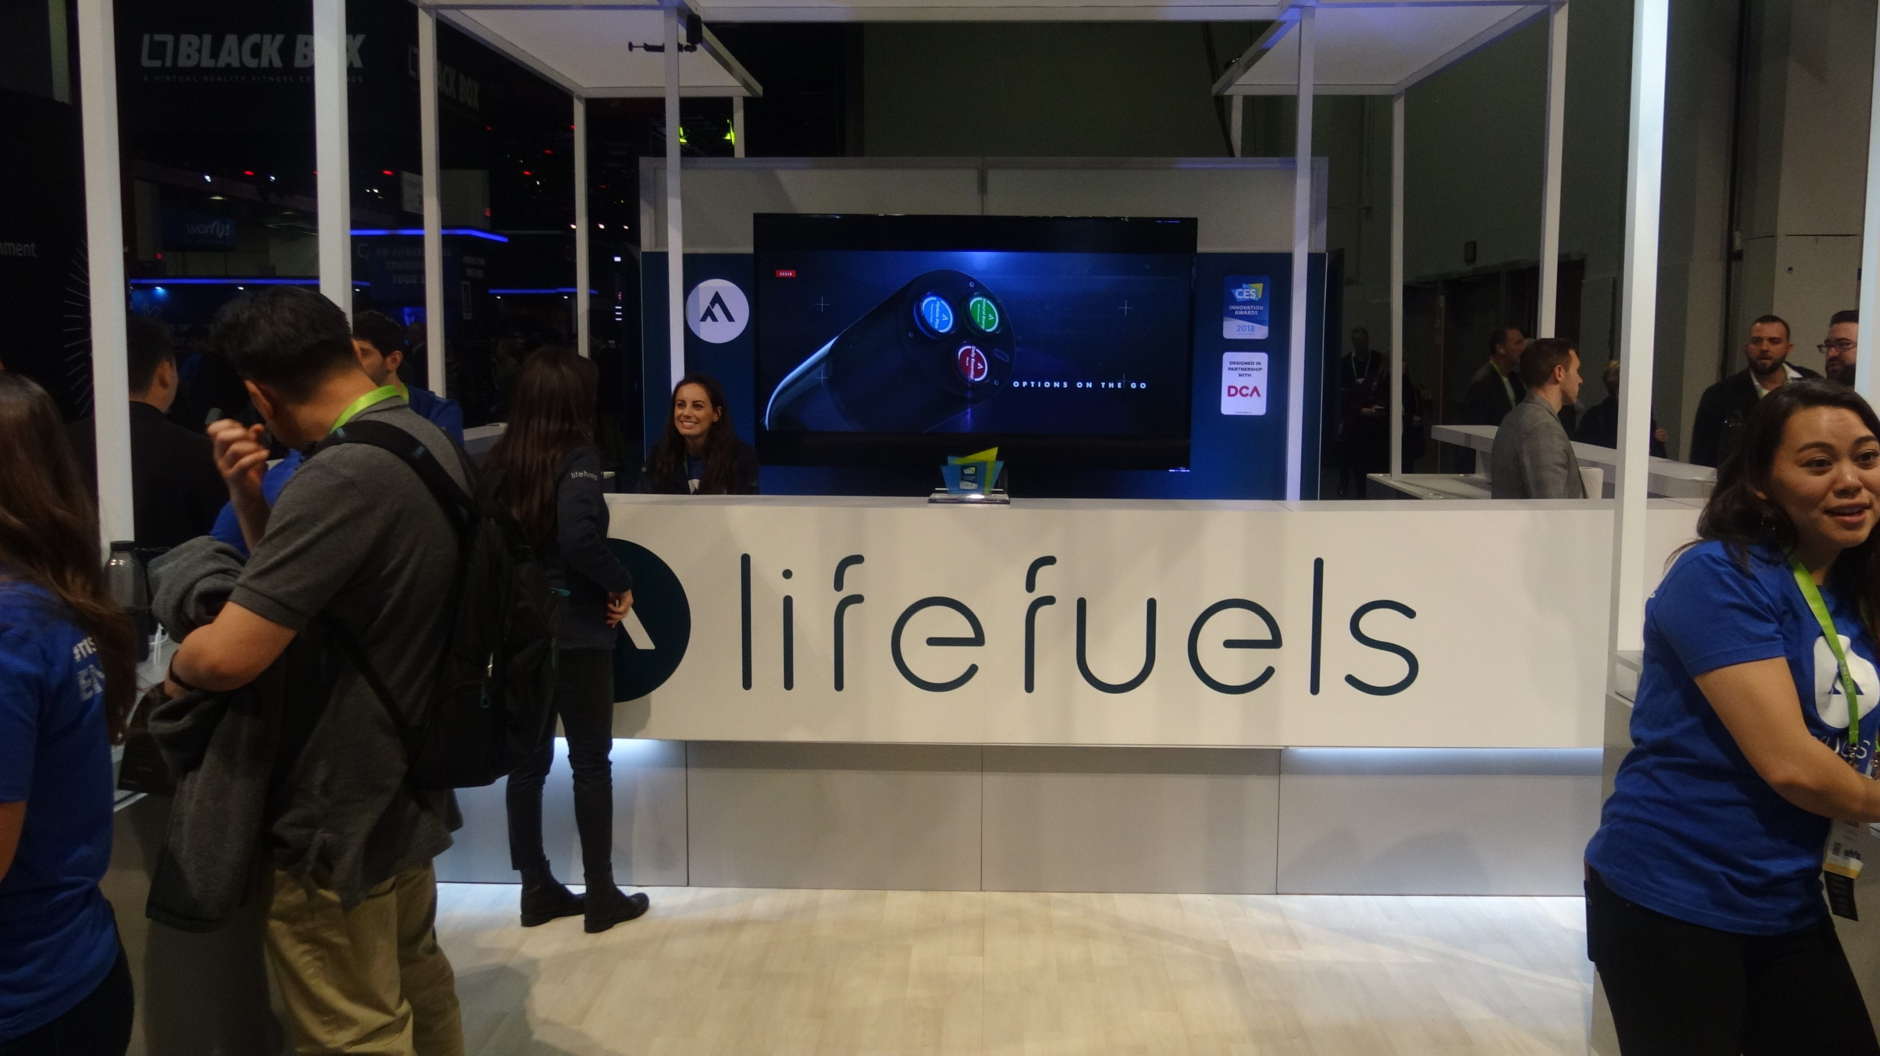 The Reston-based company LifeFuels has won 12 innovation and corporate awards since they launched their concept two years ago. (WTOP/Steve Winter)